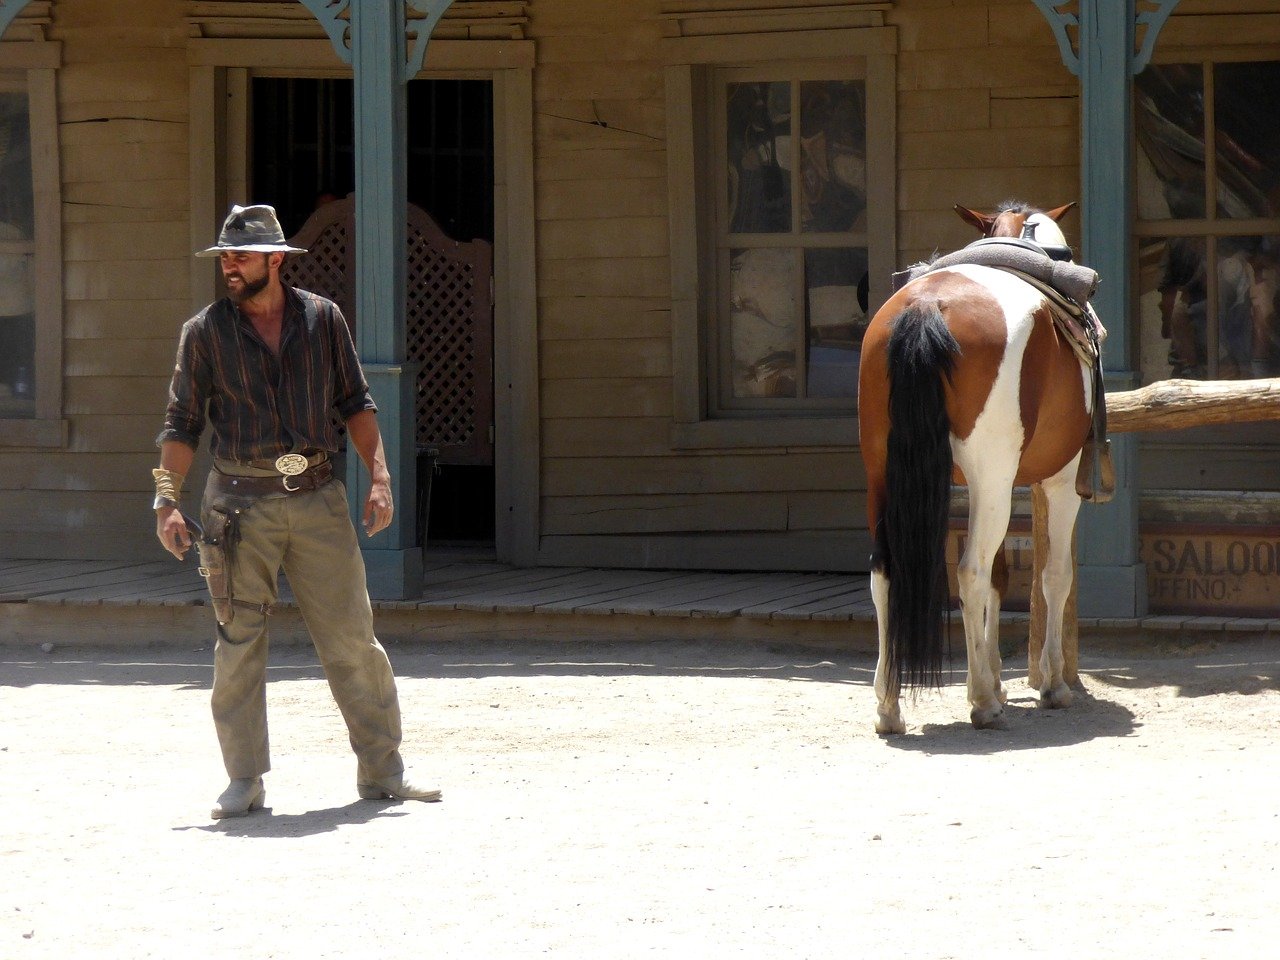 A cowboy looking confused as he looks around with a horse close by | Photo: Pixabay